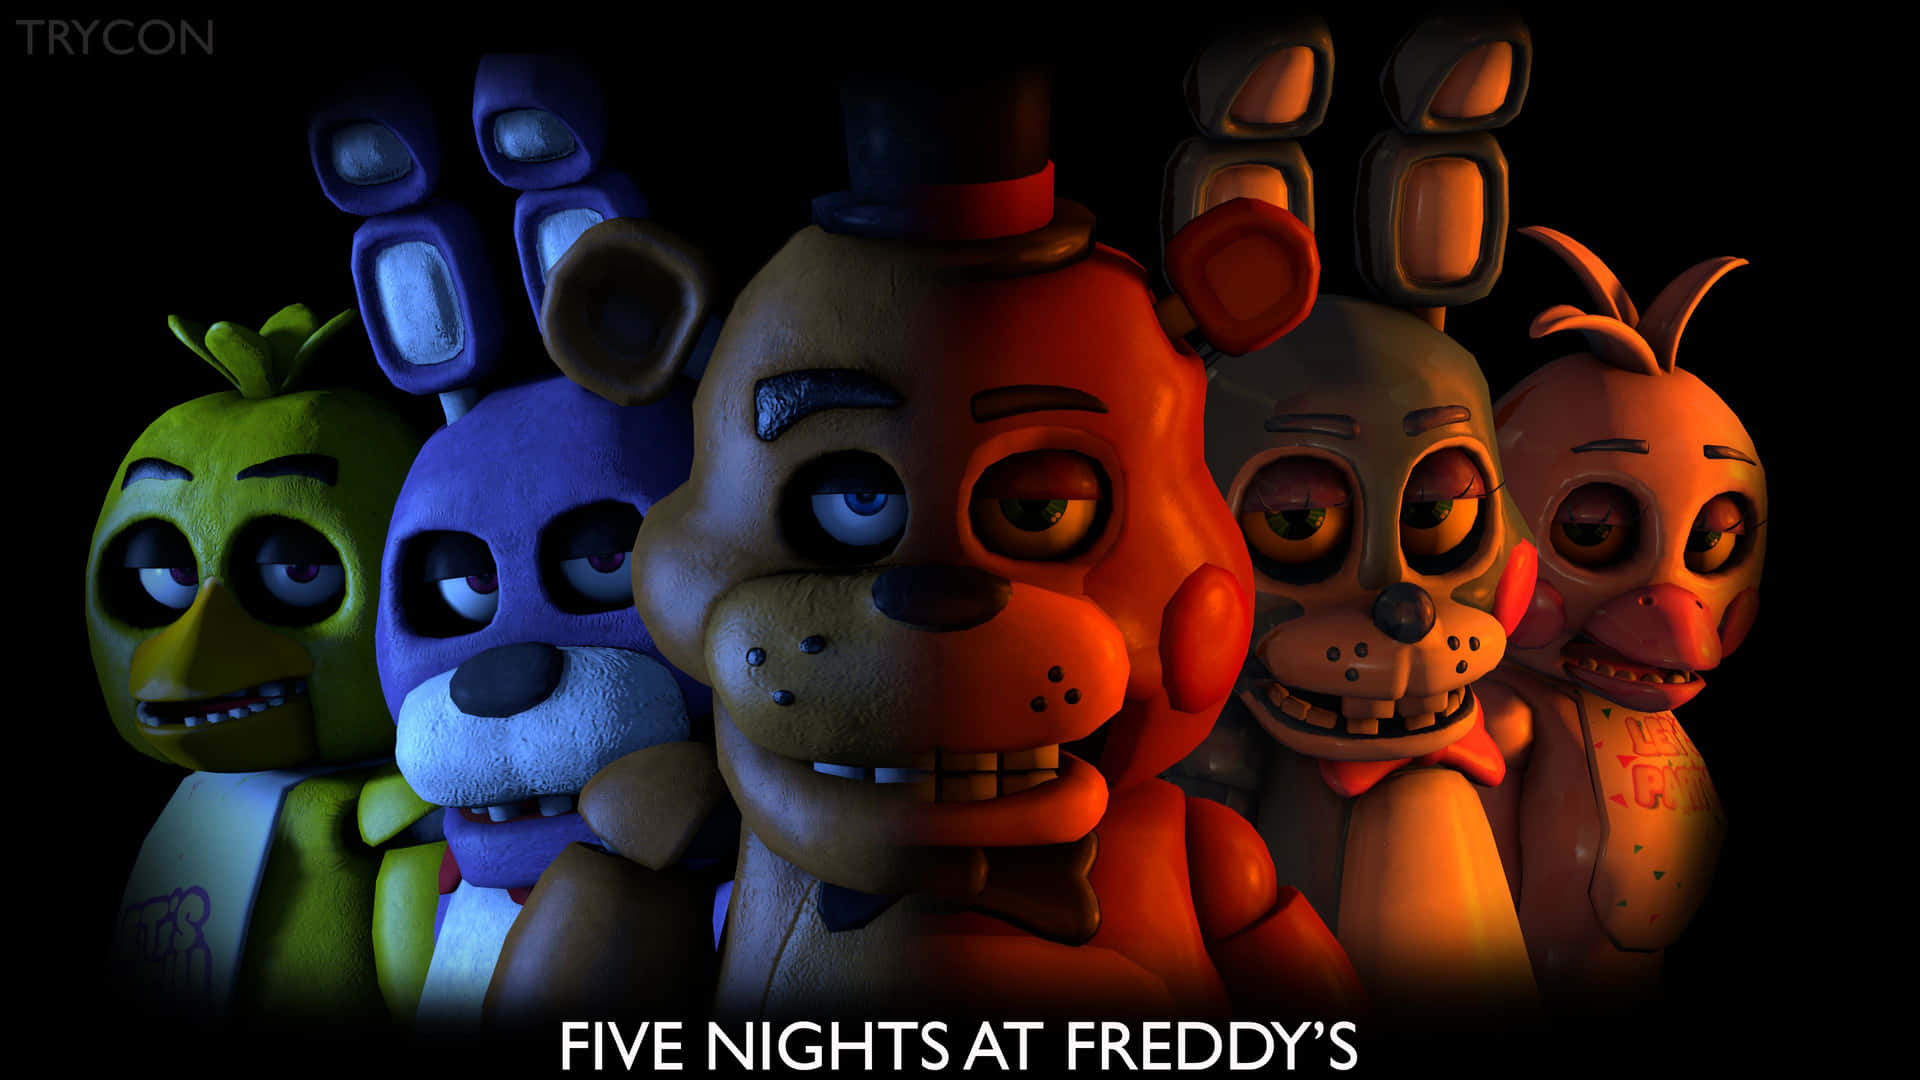 Scare your friends with the menacing FNAF creature